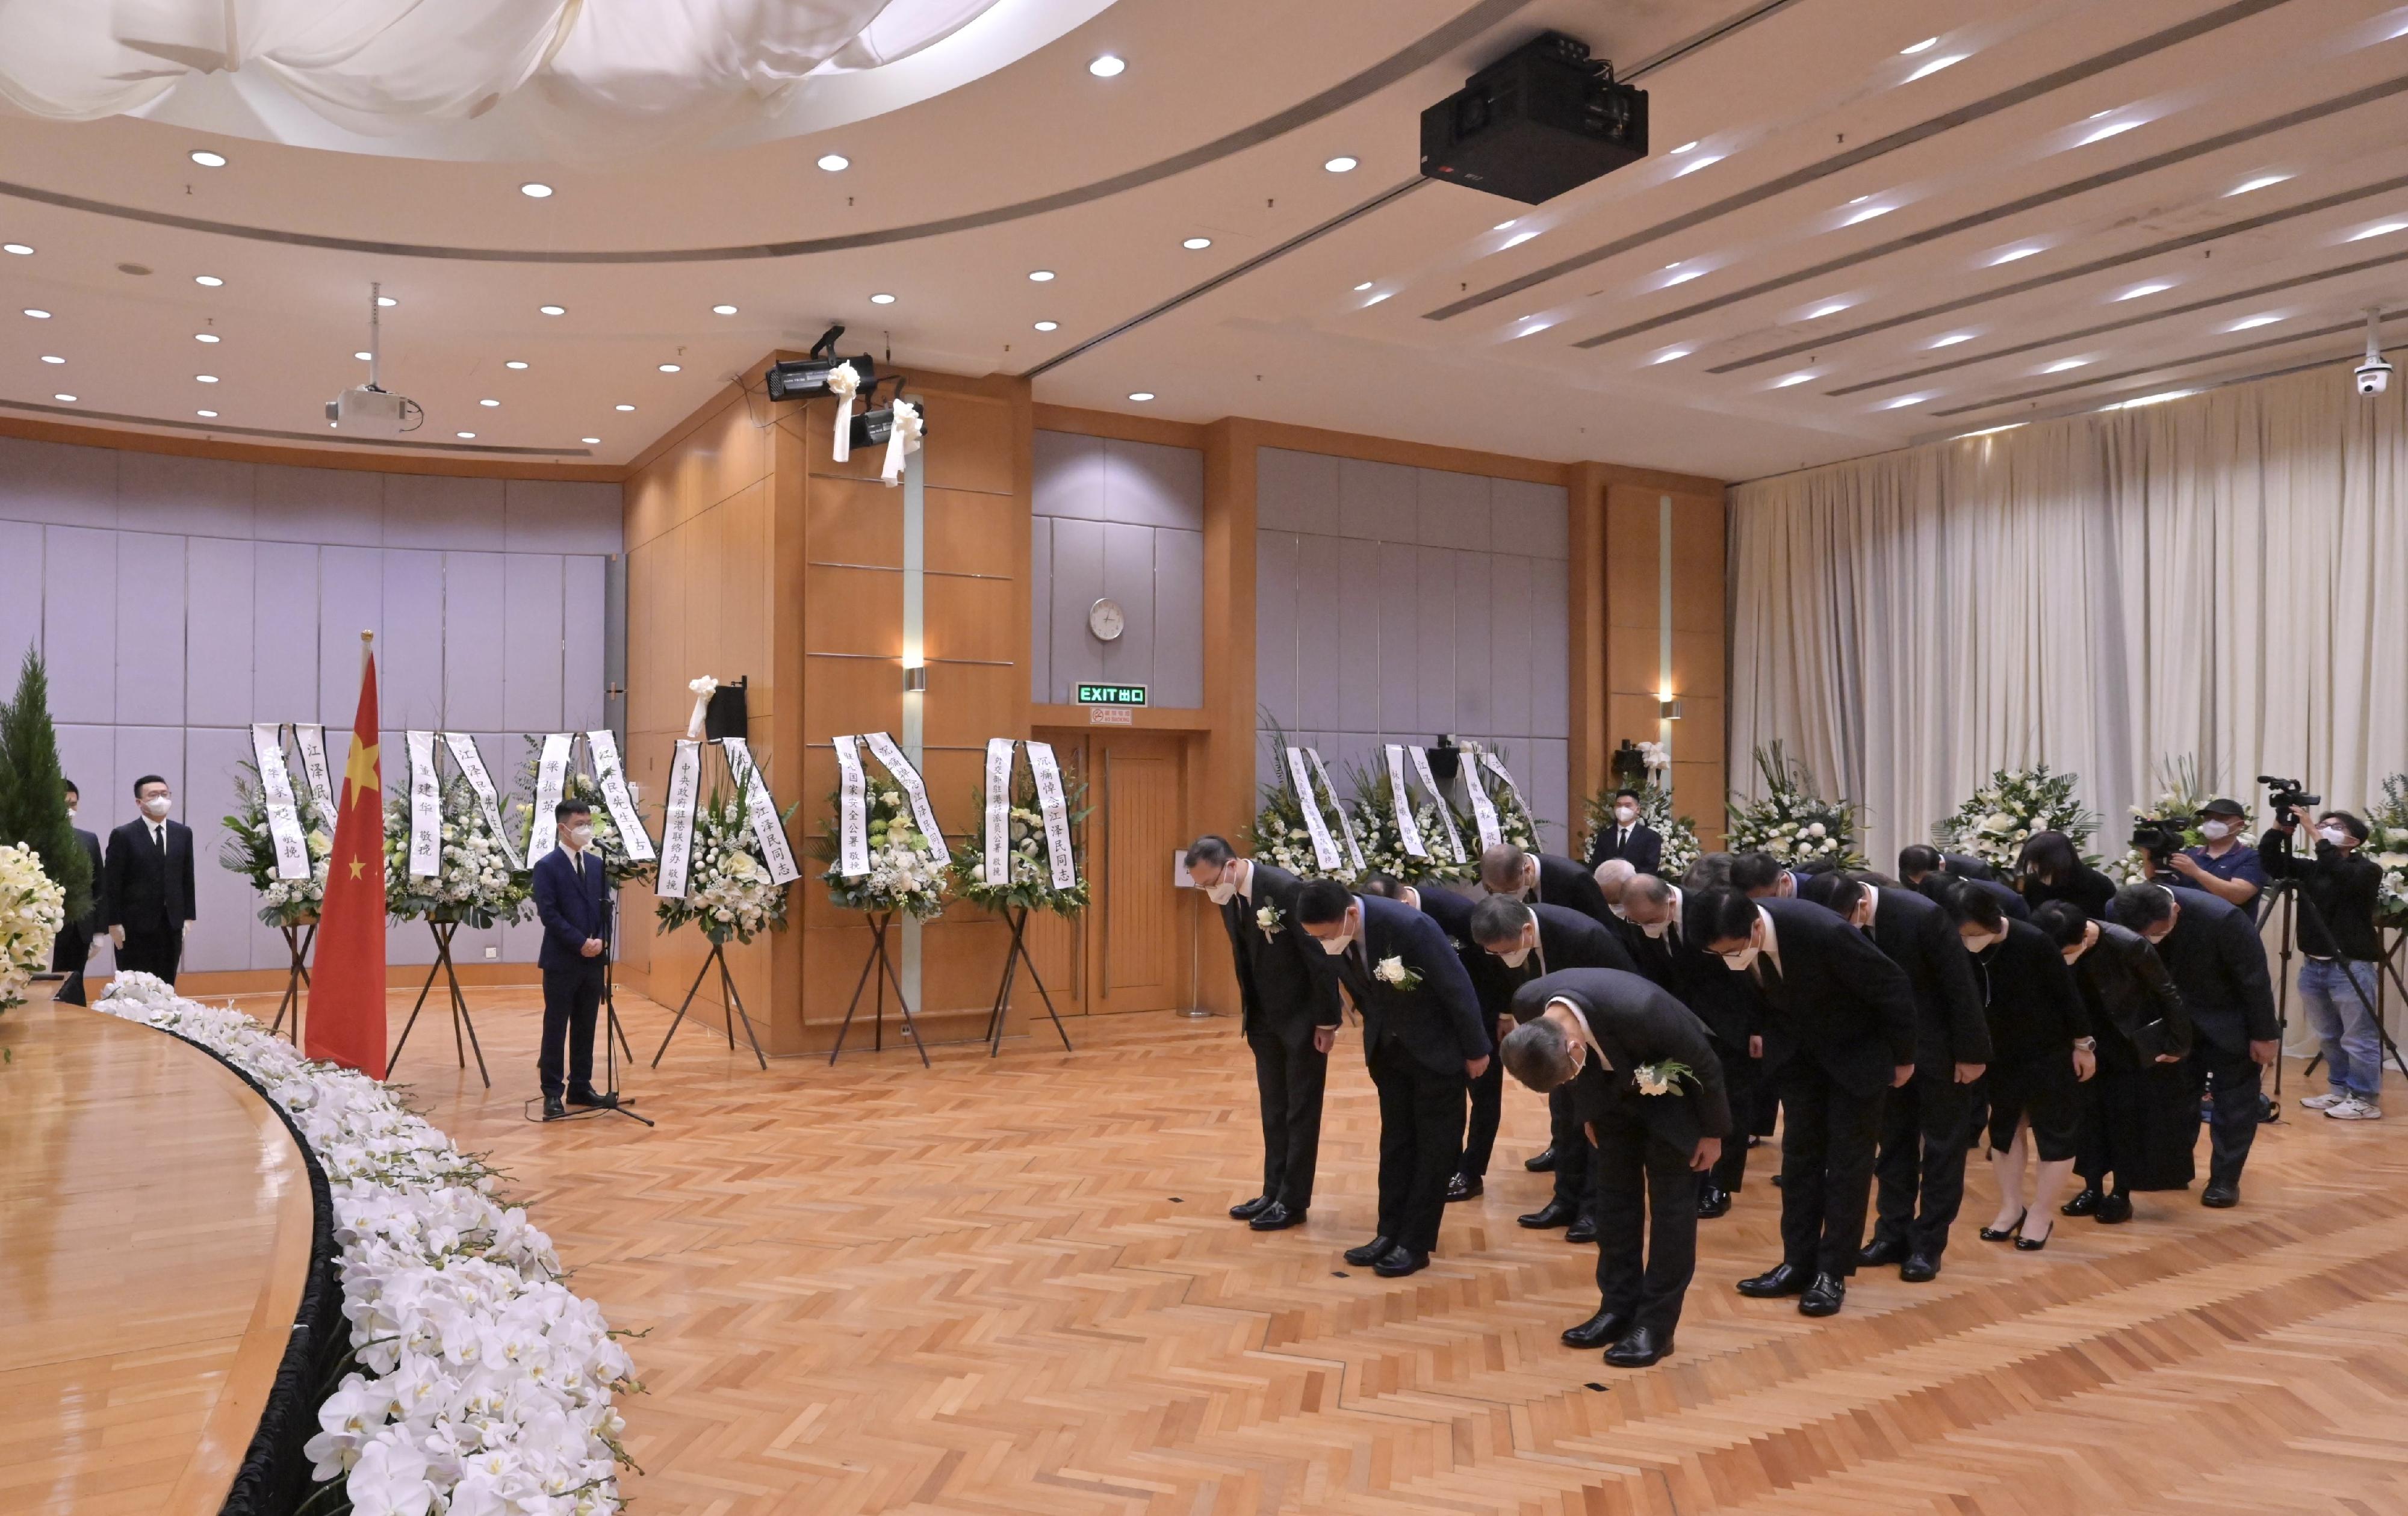 The Liaison Office of the Central People's Government in the Hong Kong Special Administrative Region (HKSAR) set up a mourning hall inside its office building for the late Former President of the People's Republic of China, Mr Jiang Zemin. Photo shows Principal Officials of the HKSAR Government paying tribute and expressing profound condolences over President Jiang's passing.